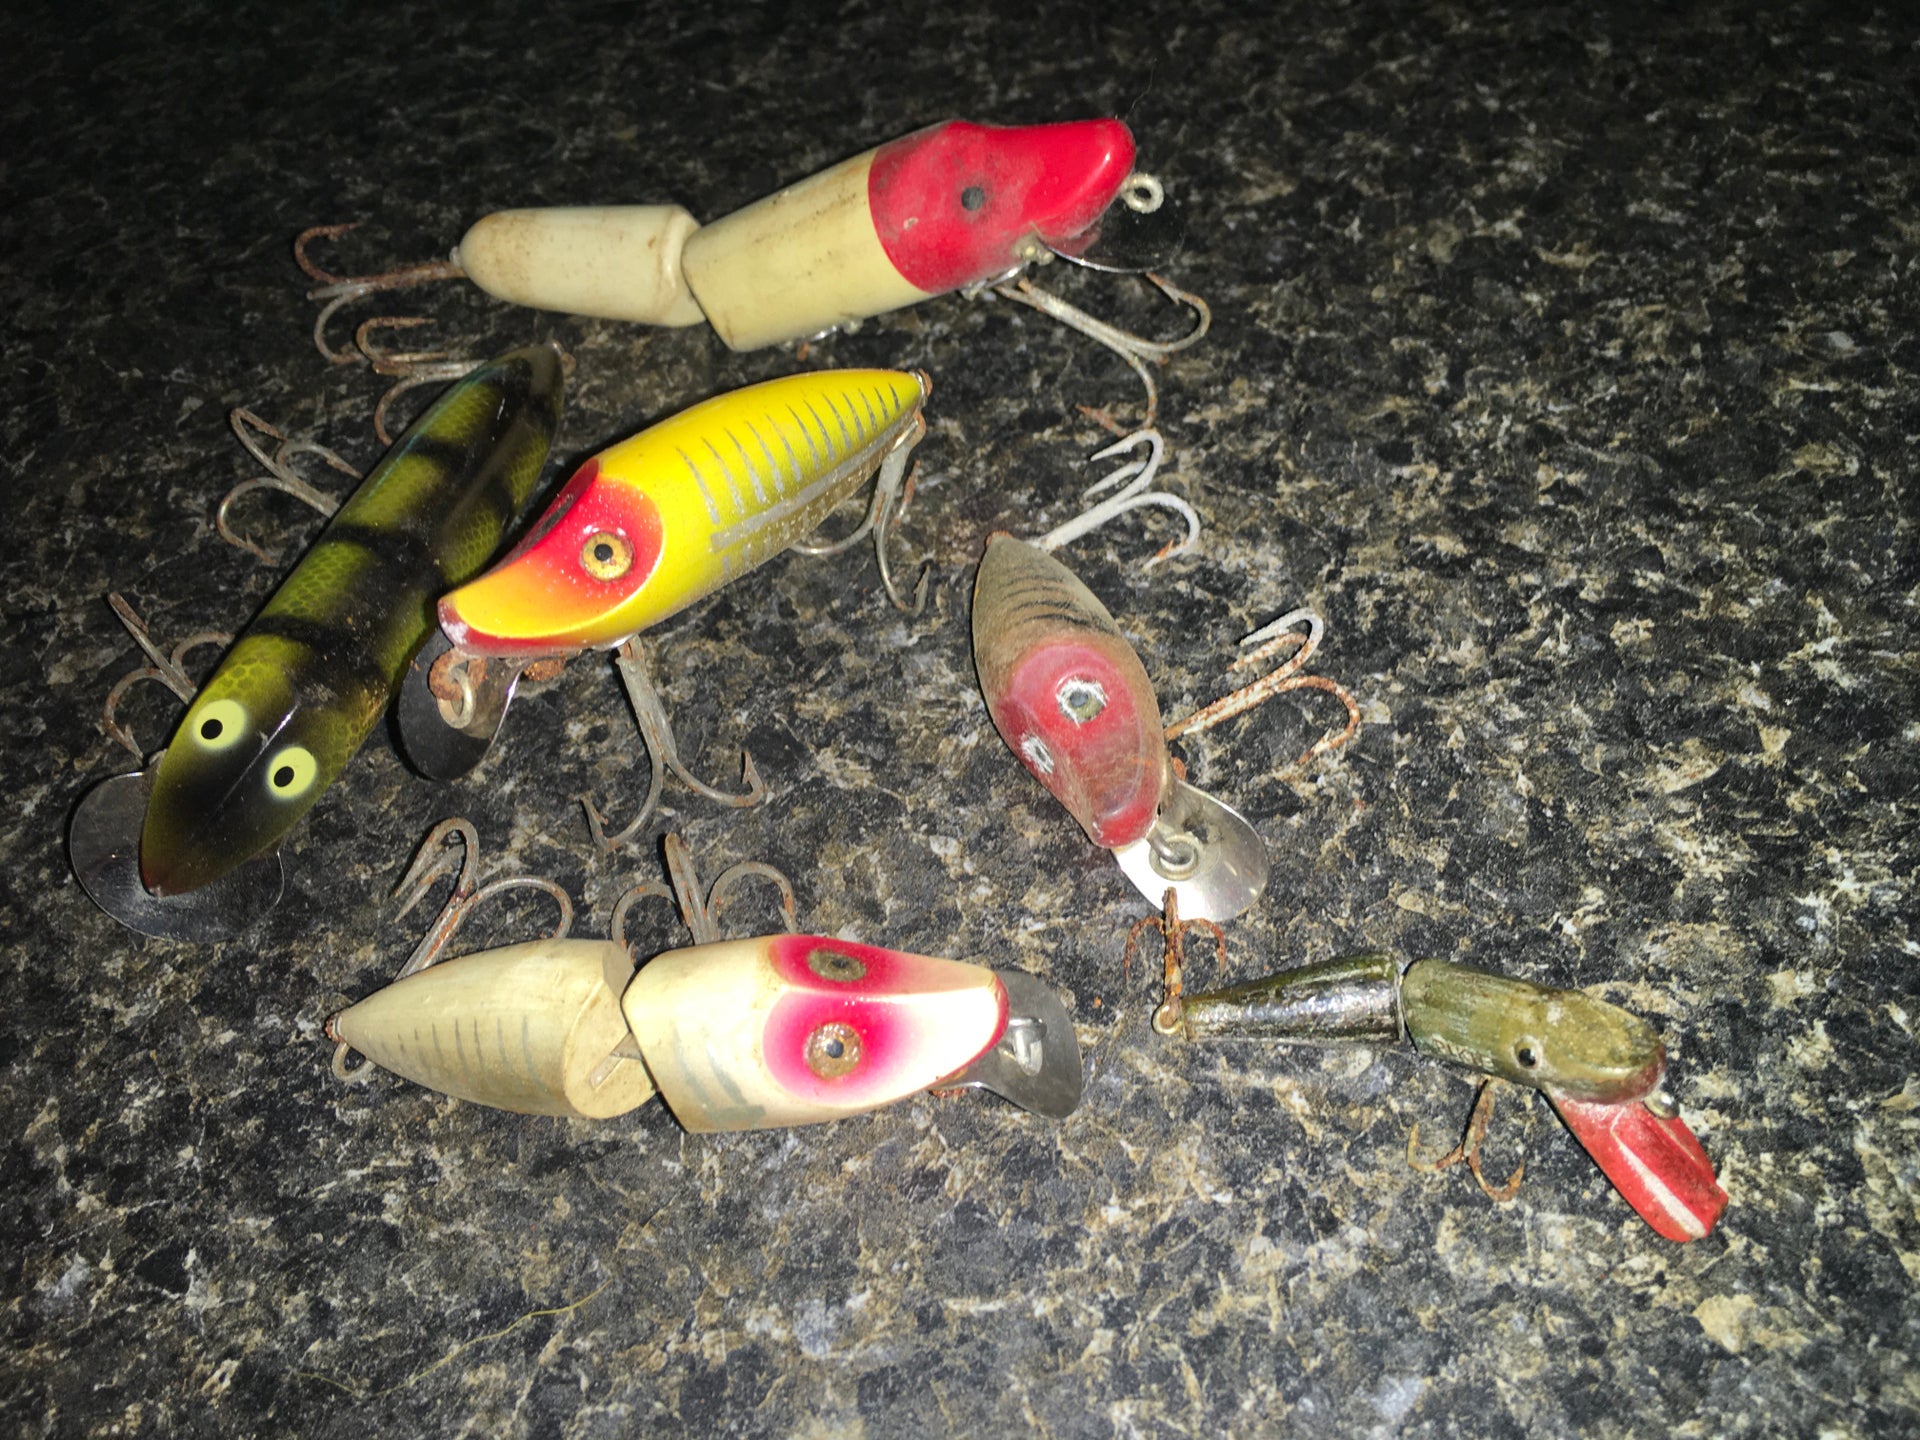 Old Heddon lure I found in a tackle box my boss gave me. Made out